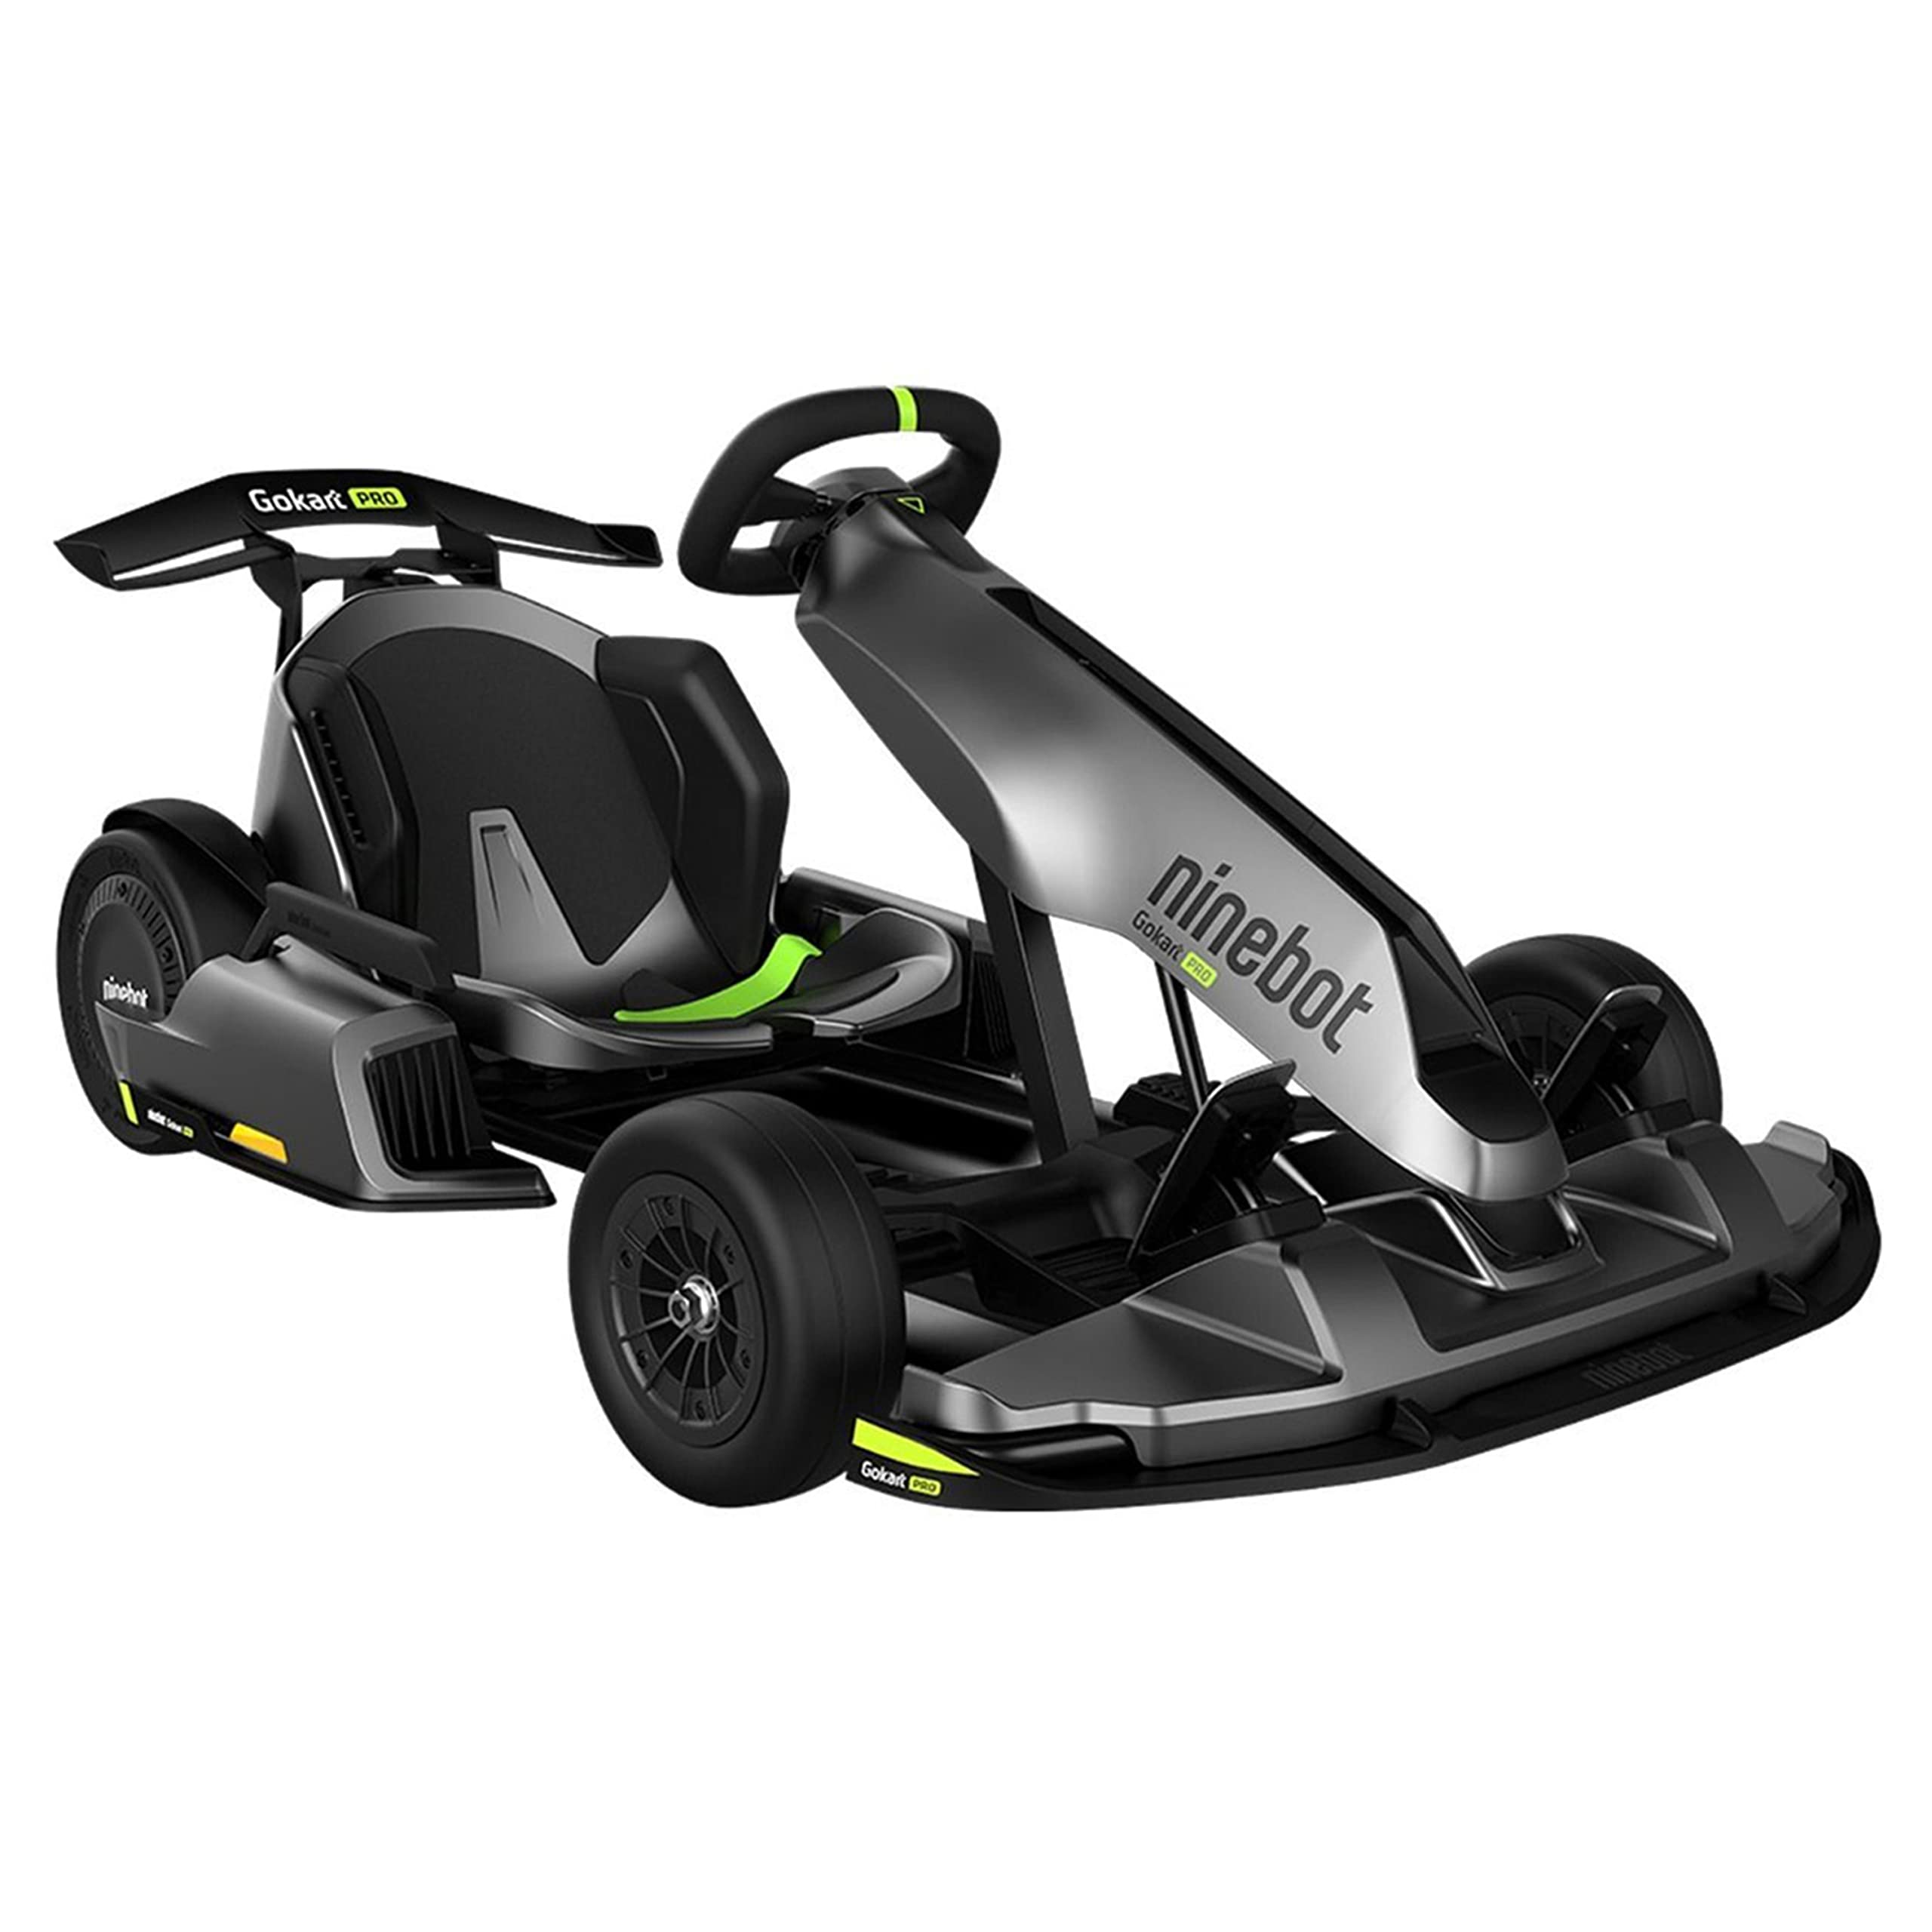 Segway Ninebot Electric GoKart Pro, Outdoor Race Pedal Go Karting Car for Kids and Adults, Ride On Toys (Ninebot S MAX Included), Black - Amazon $1519.99